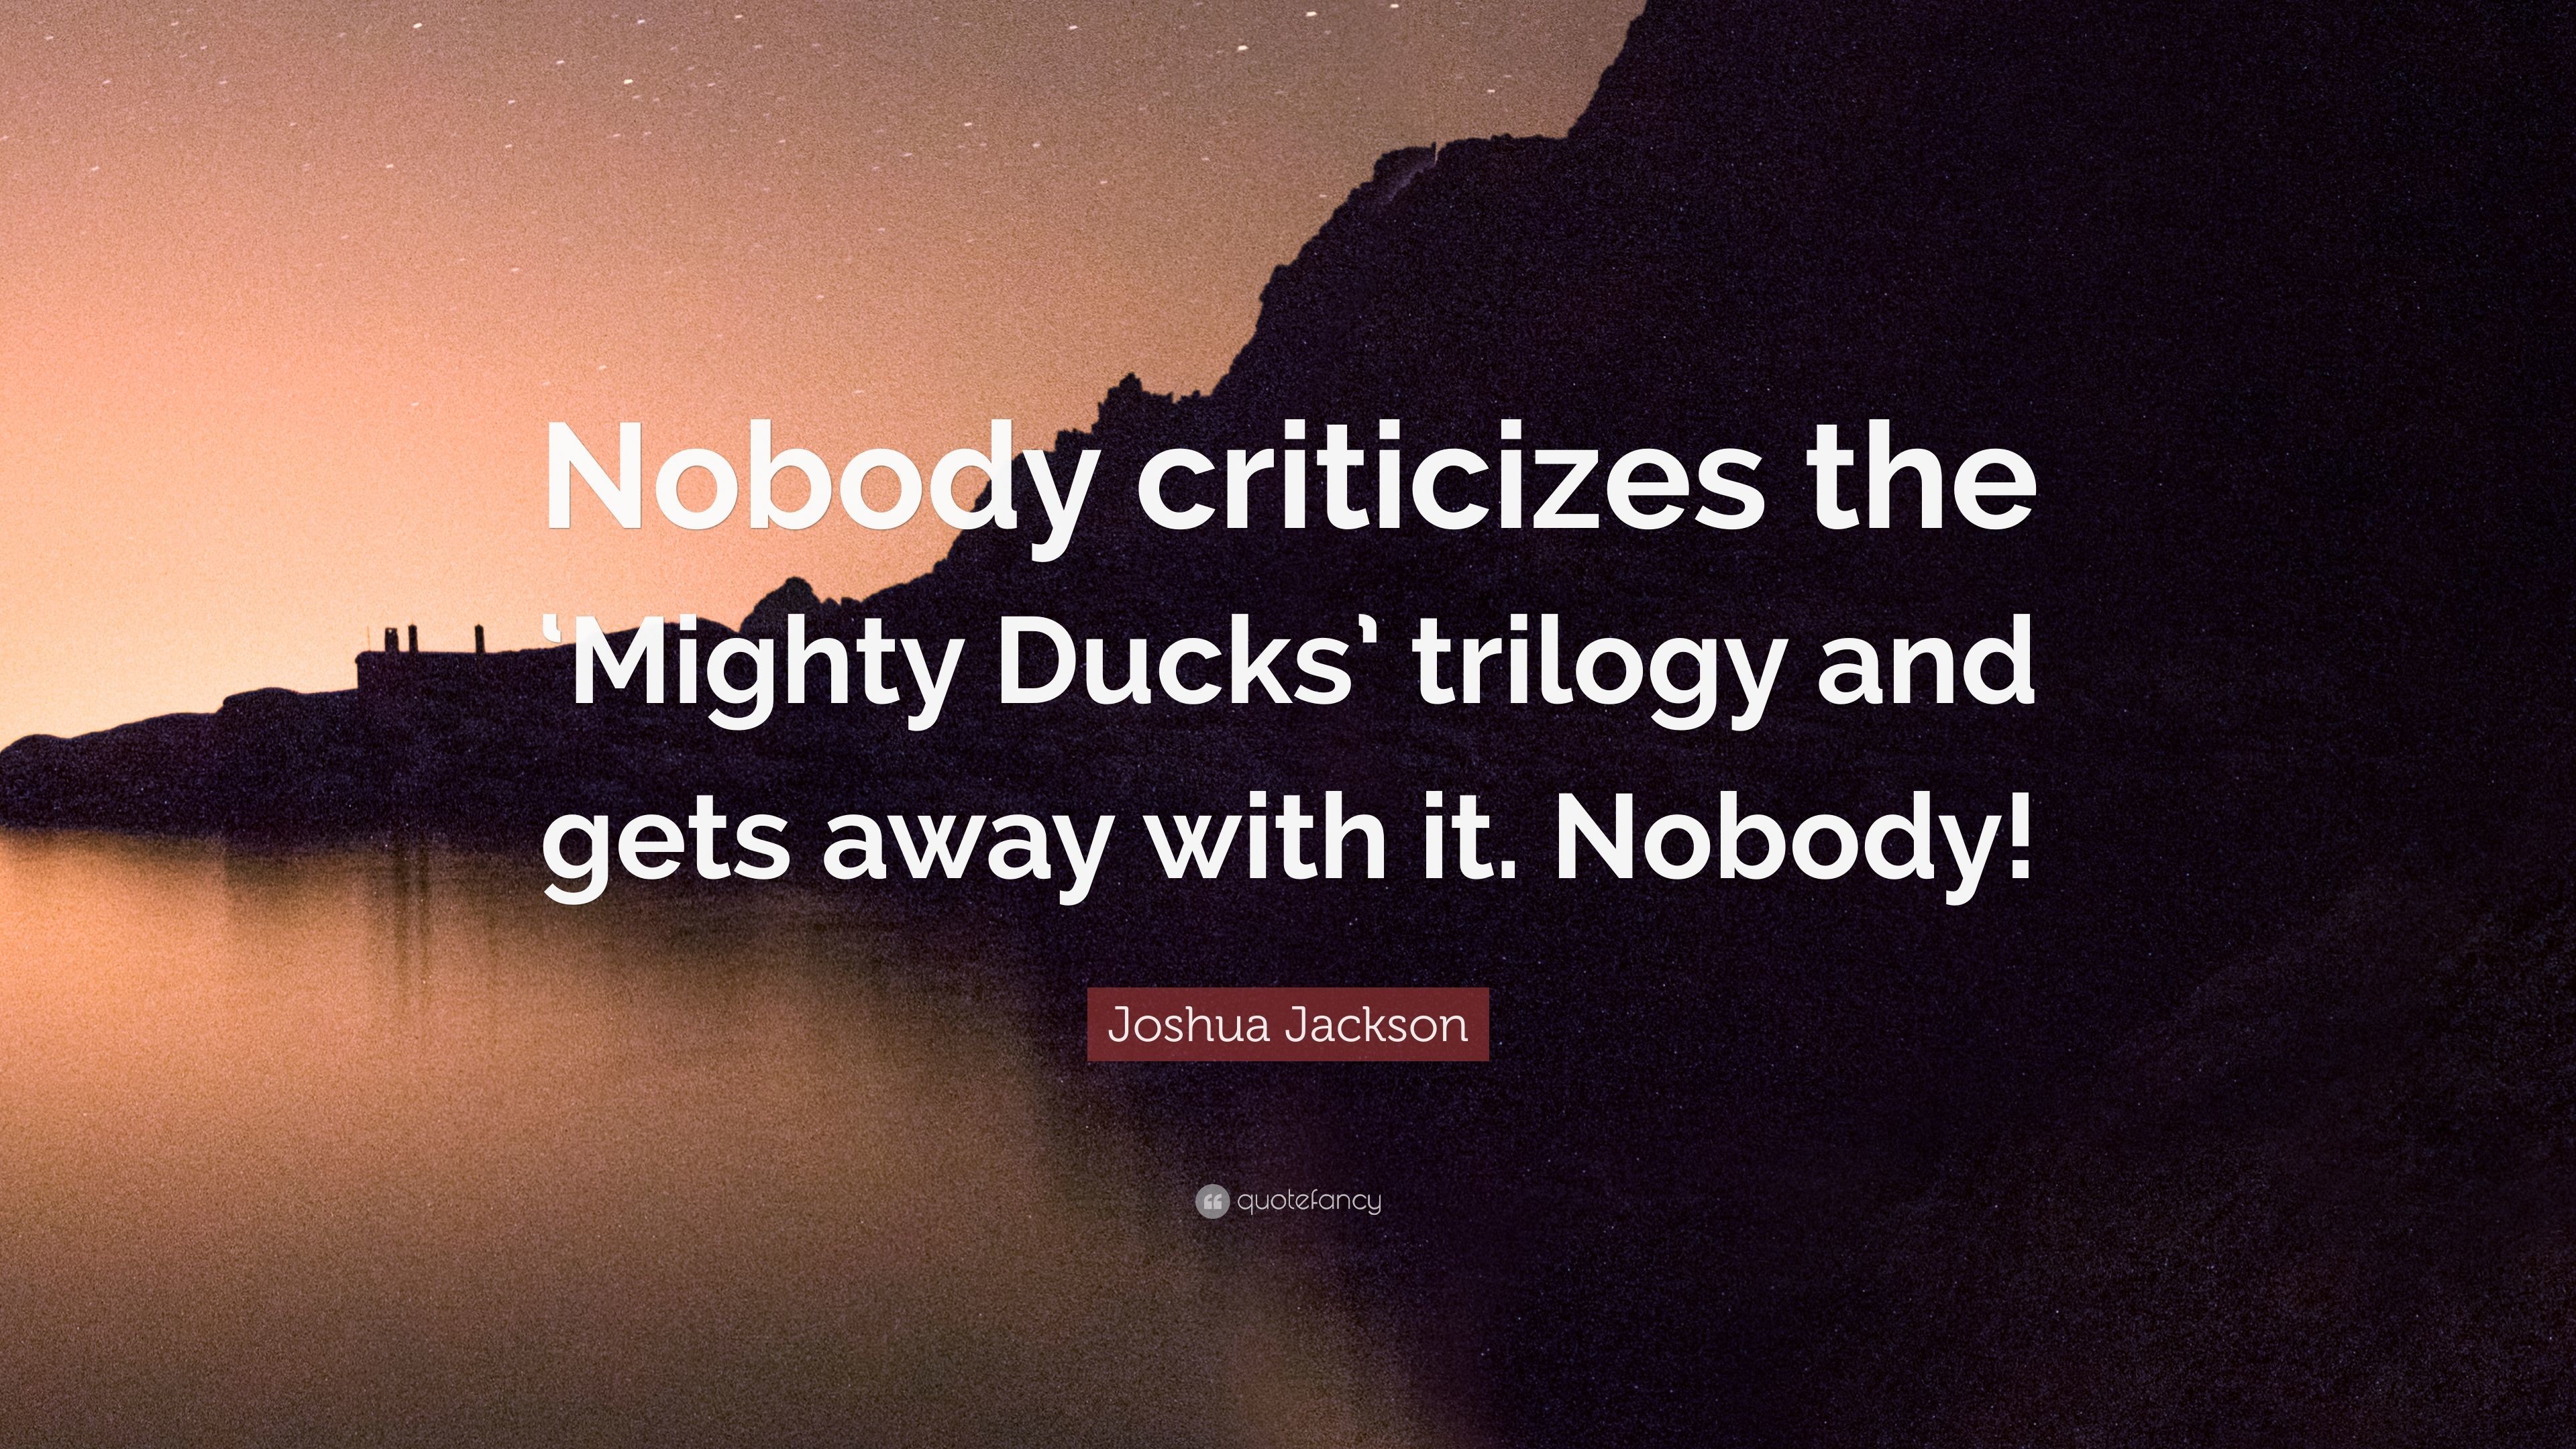 3840x2160 Joshua Jackson Quote: “Nobody criticizes the 'Mighty Ducks' trilogy and  gets away